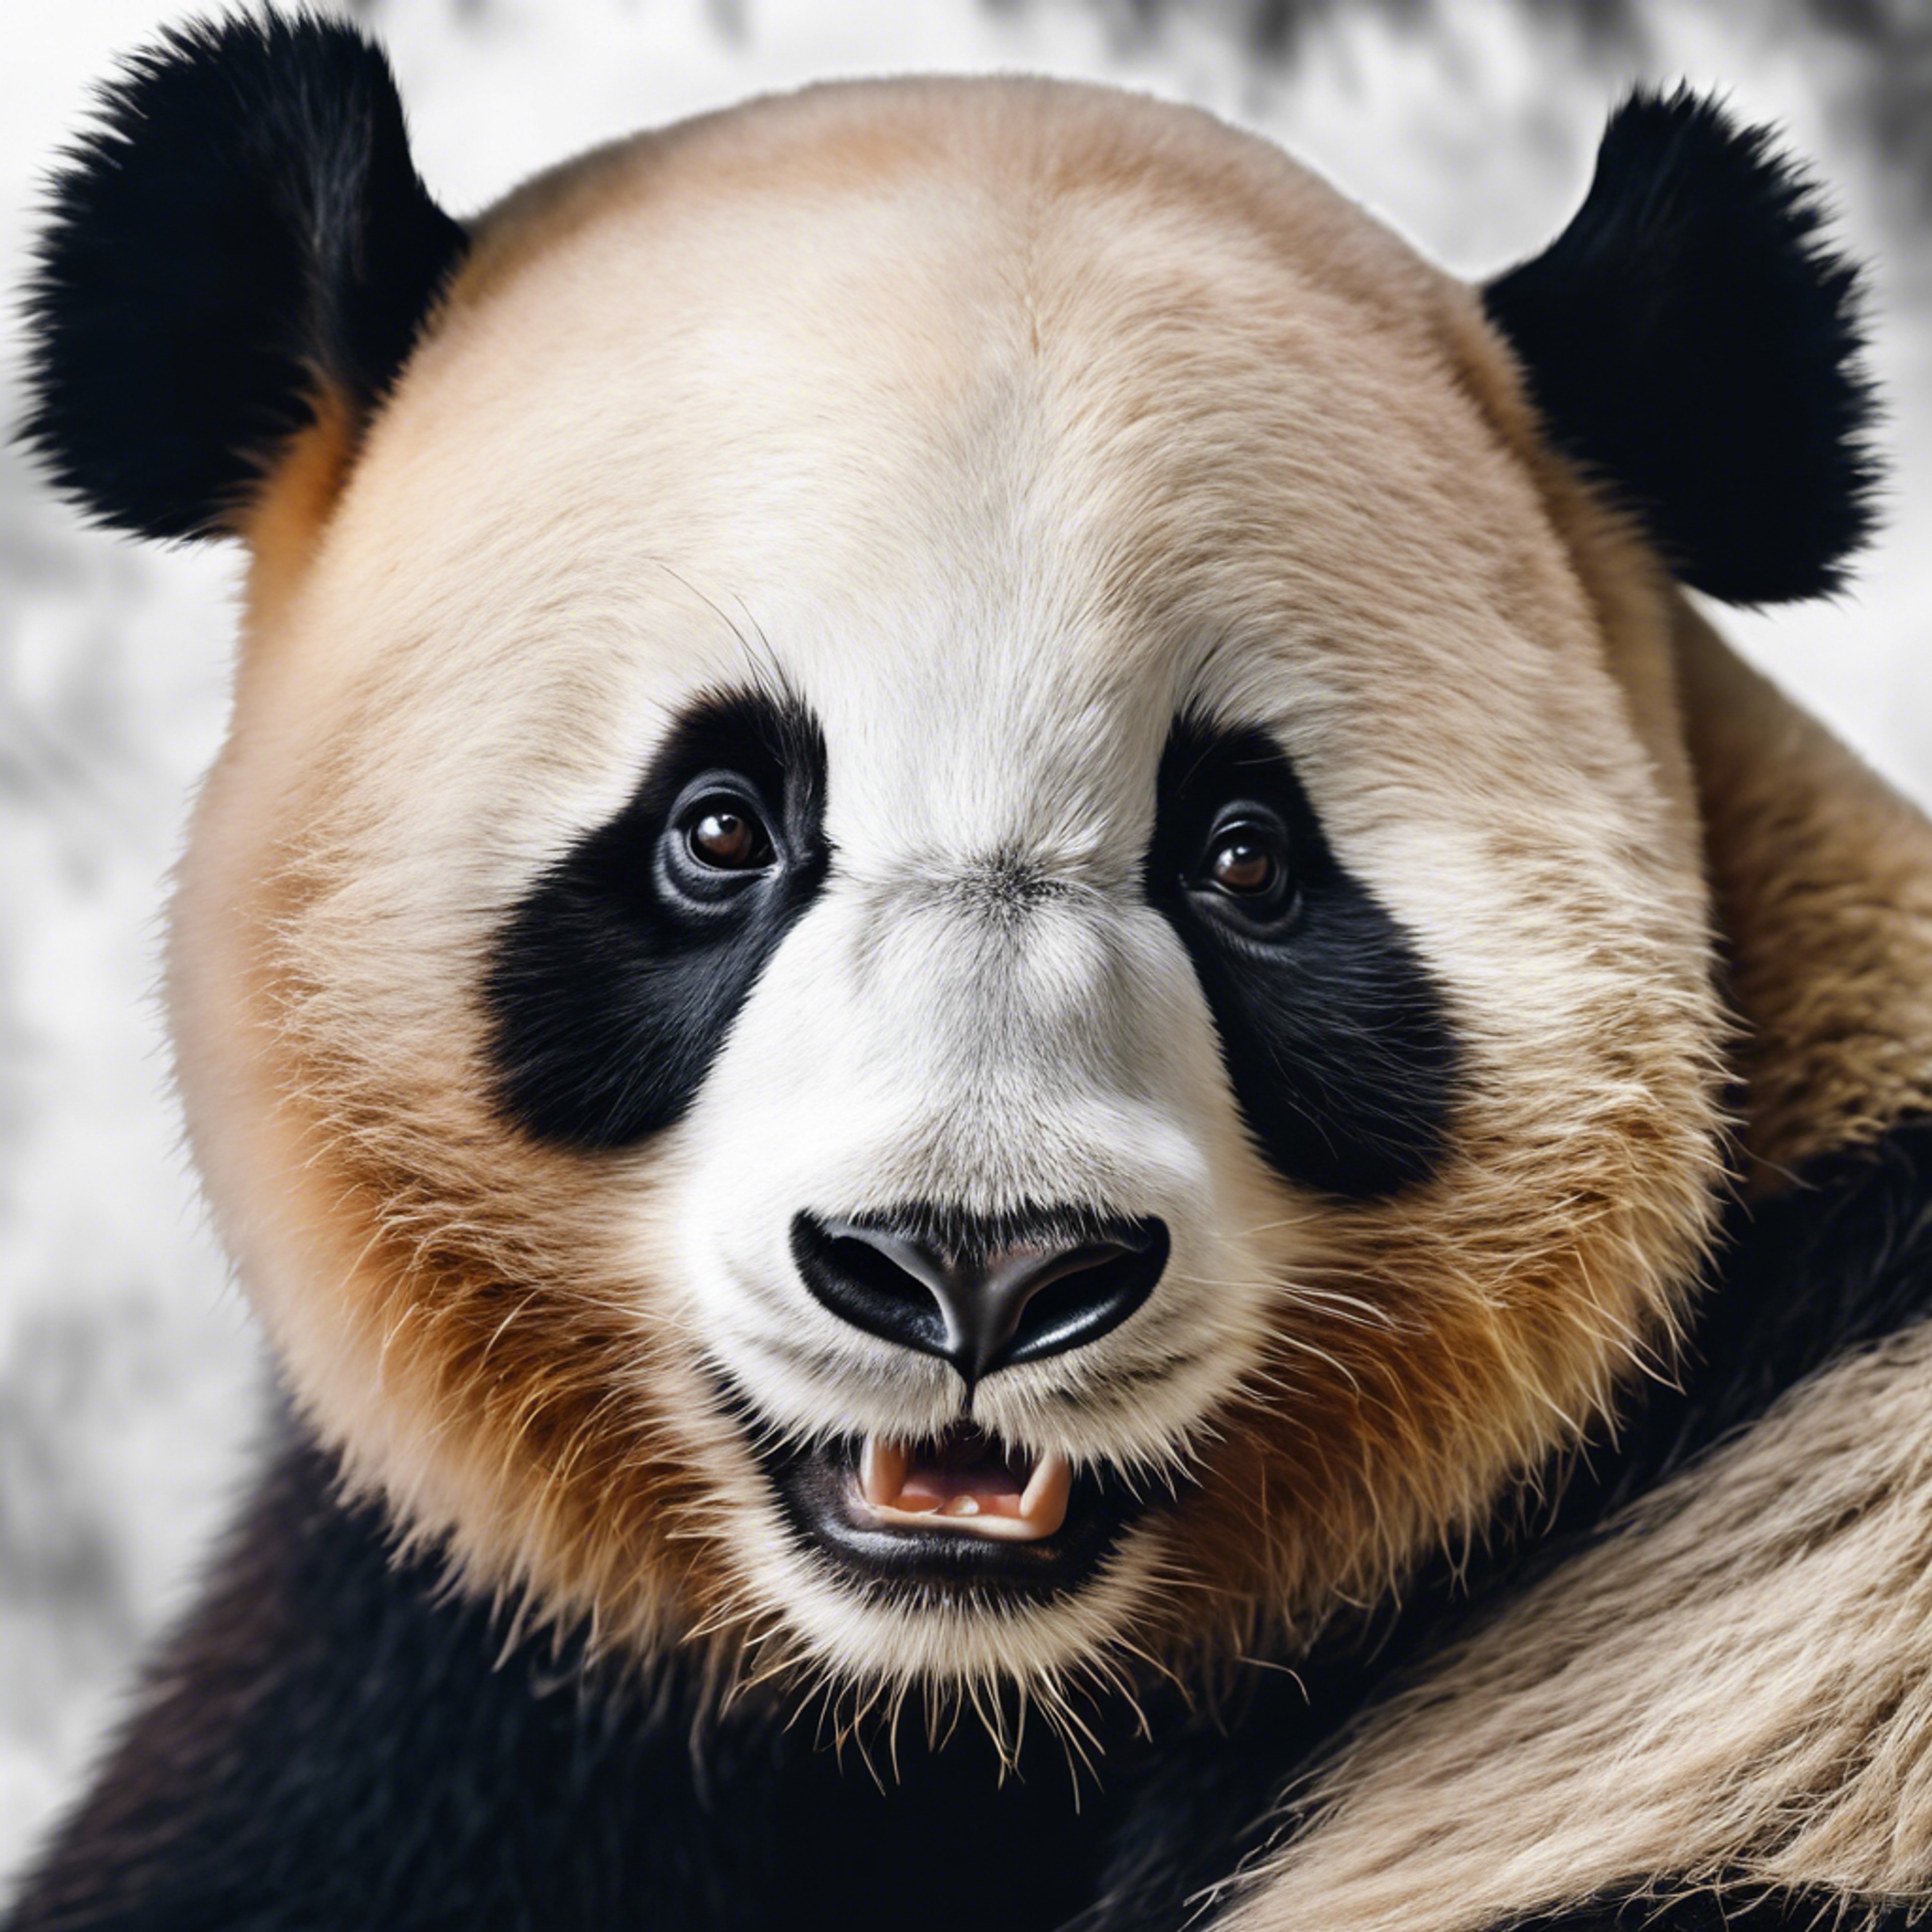 A close-up portrait of a smiling panda, showcasing the joy and charm of this magnificent creature. ورق الجدران[5b22781787714e61bfbc]